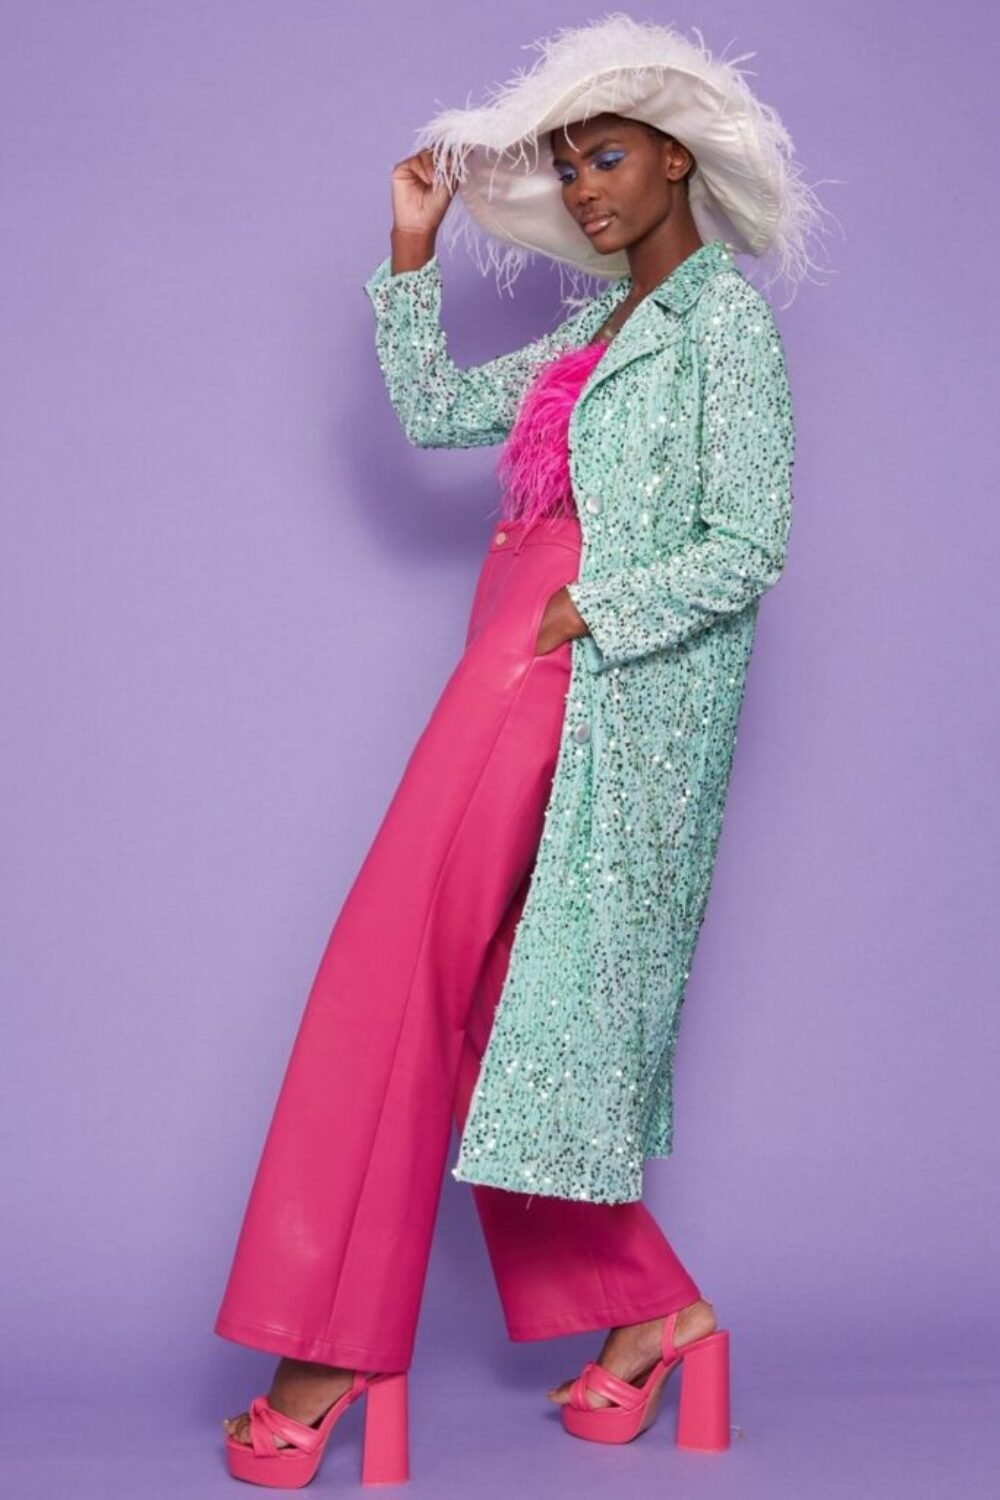 Shop Lux Mint Sequin Velvet Trench Coat and women's luxury and designer clothes at www.lux-apparel.co.uk